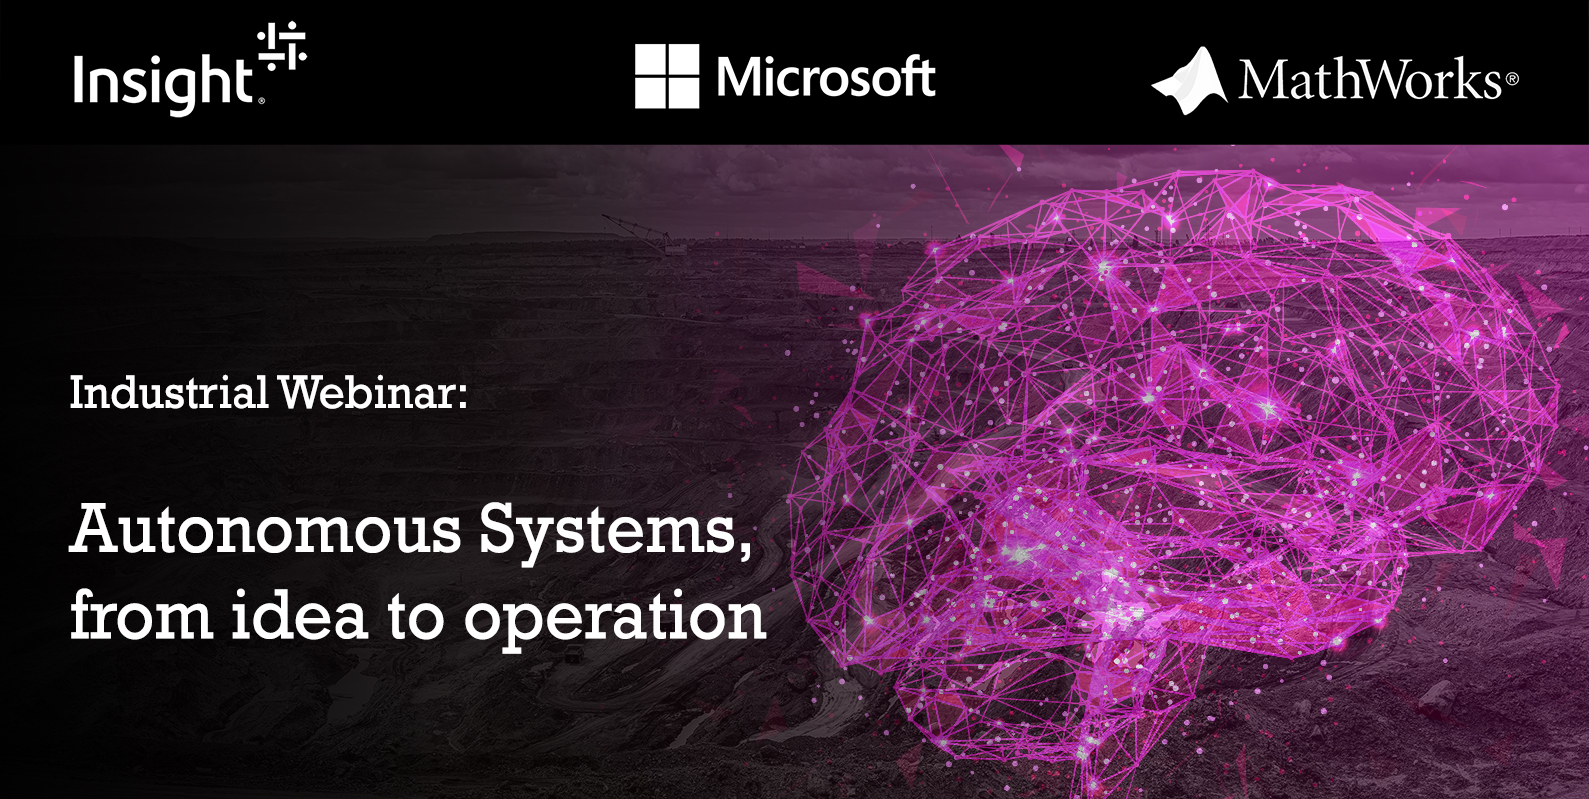 Article Webinar: Autonomous Systems, from idea to operation Image